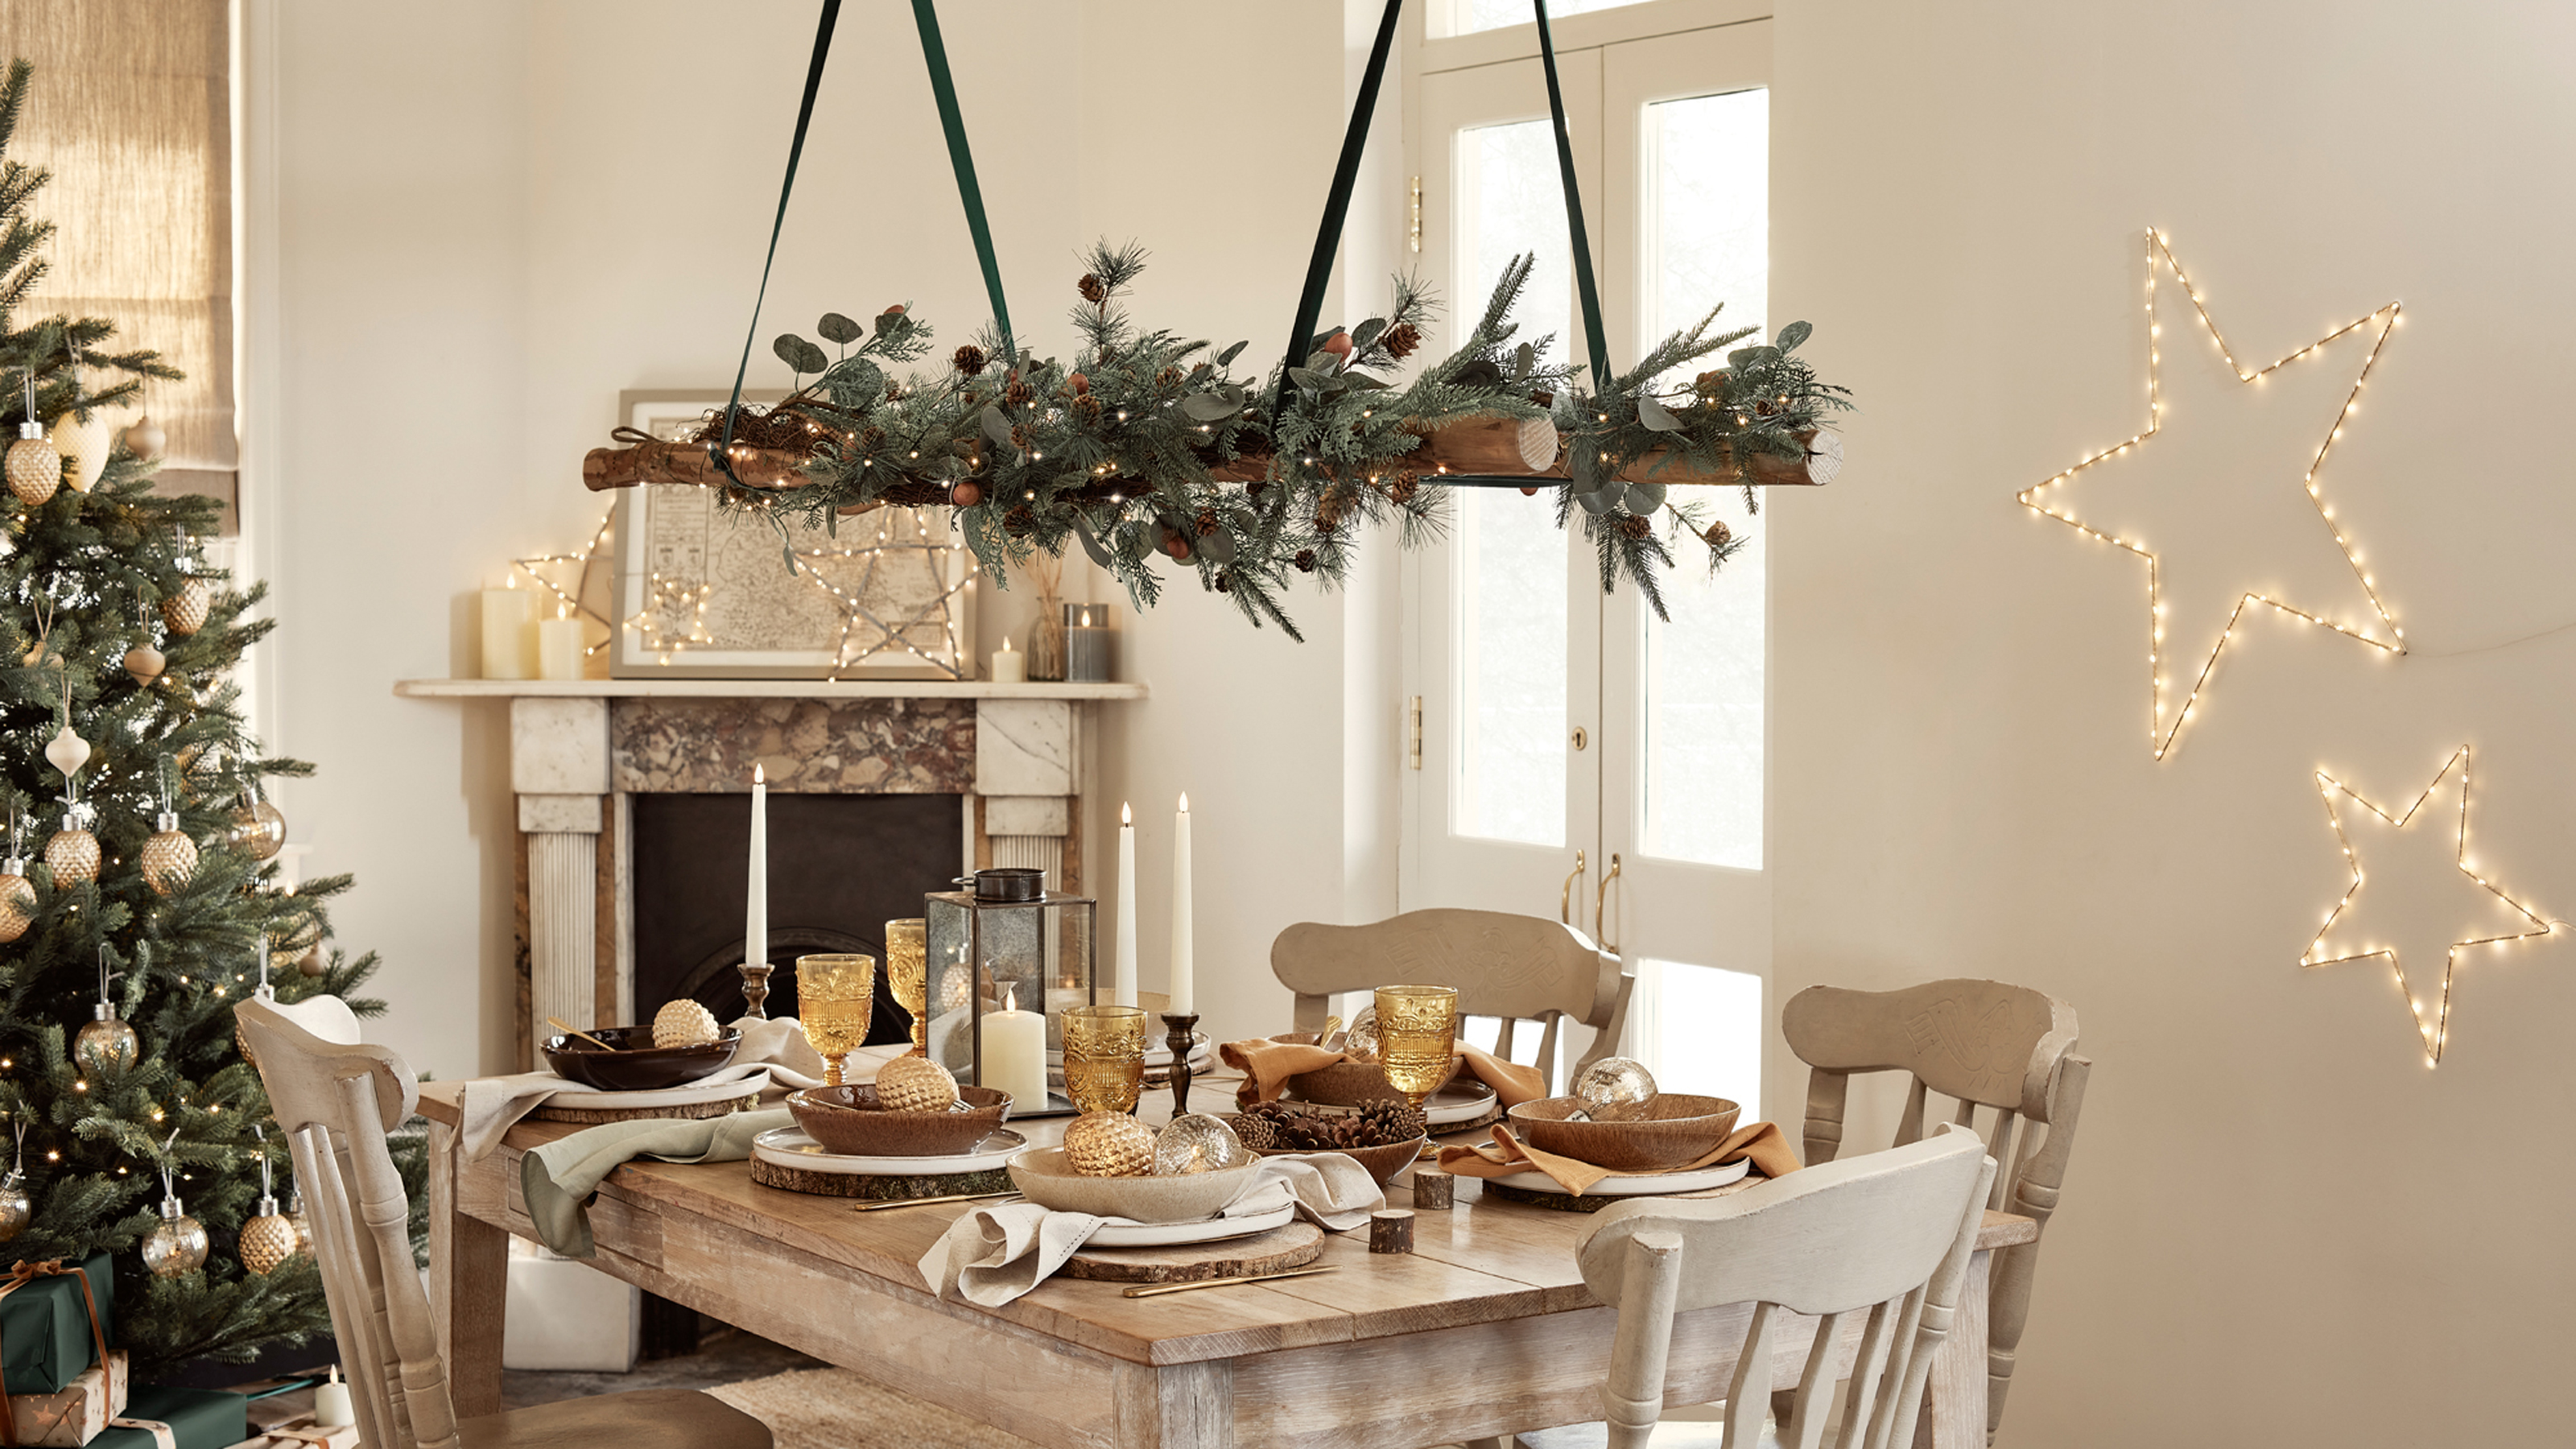 When to put up Christmas decorations, according to experts | Real ...